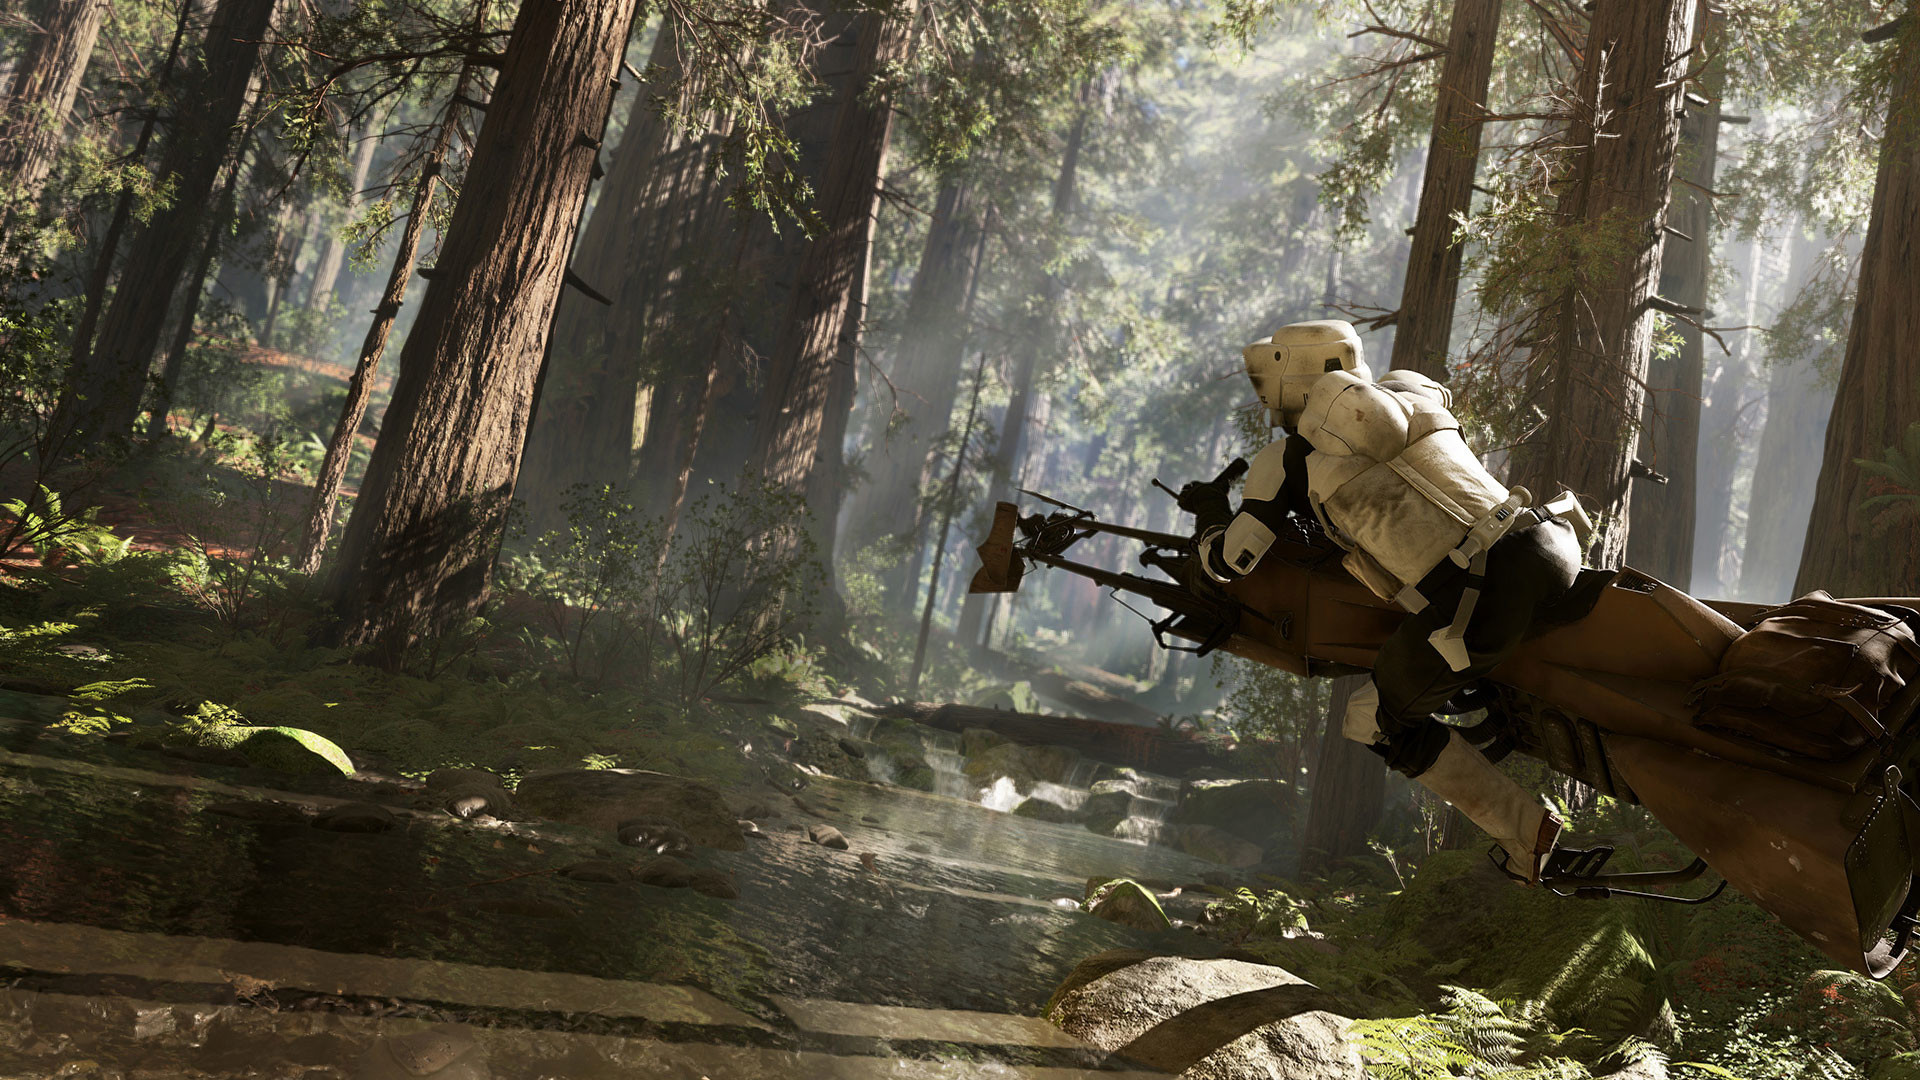 Wallpaper in 1080p from the Star Wars Battlefront webpage.